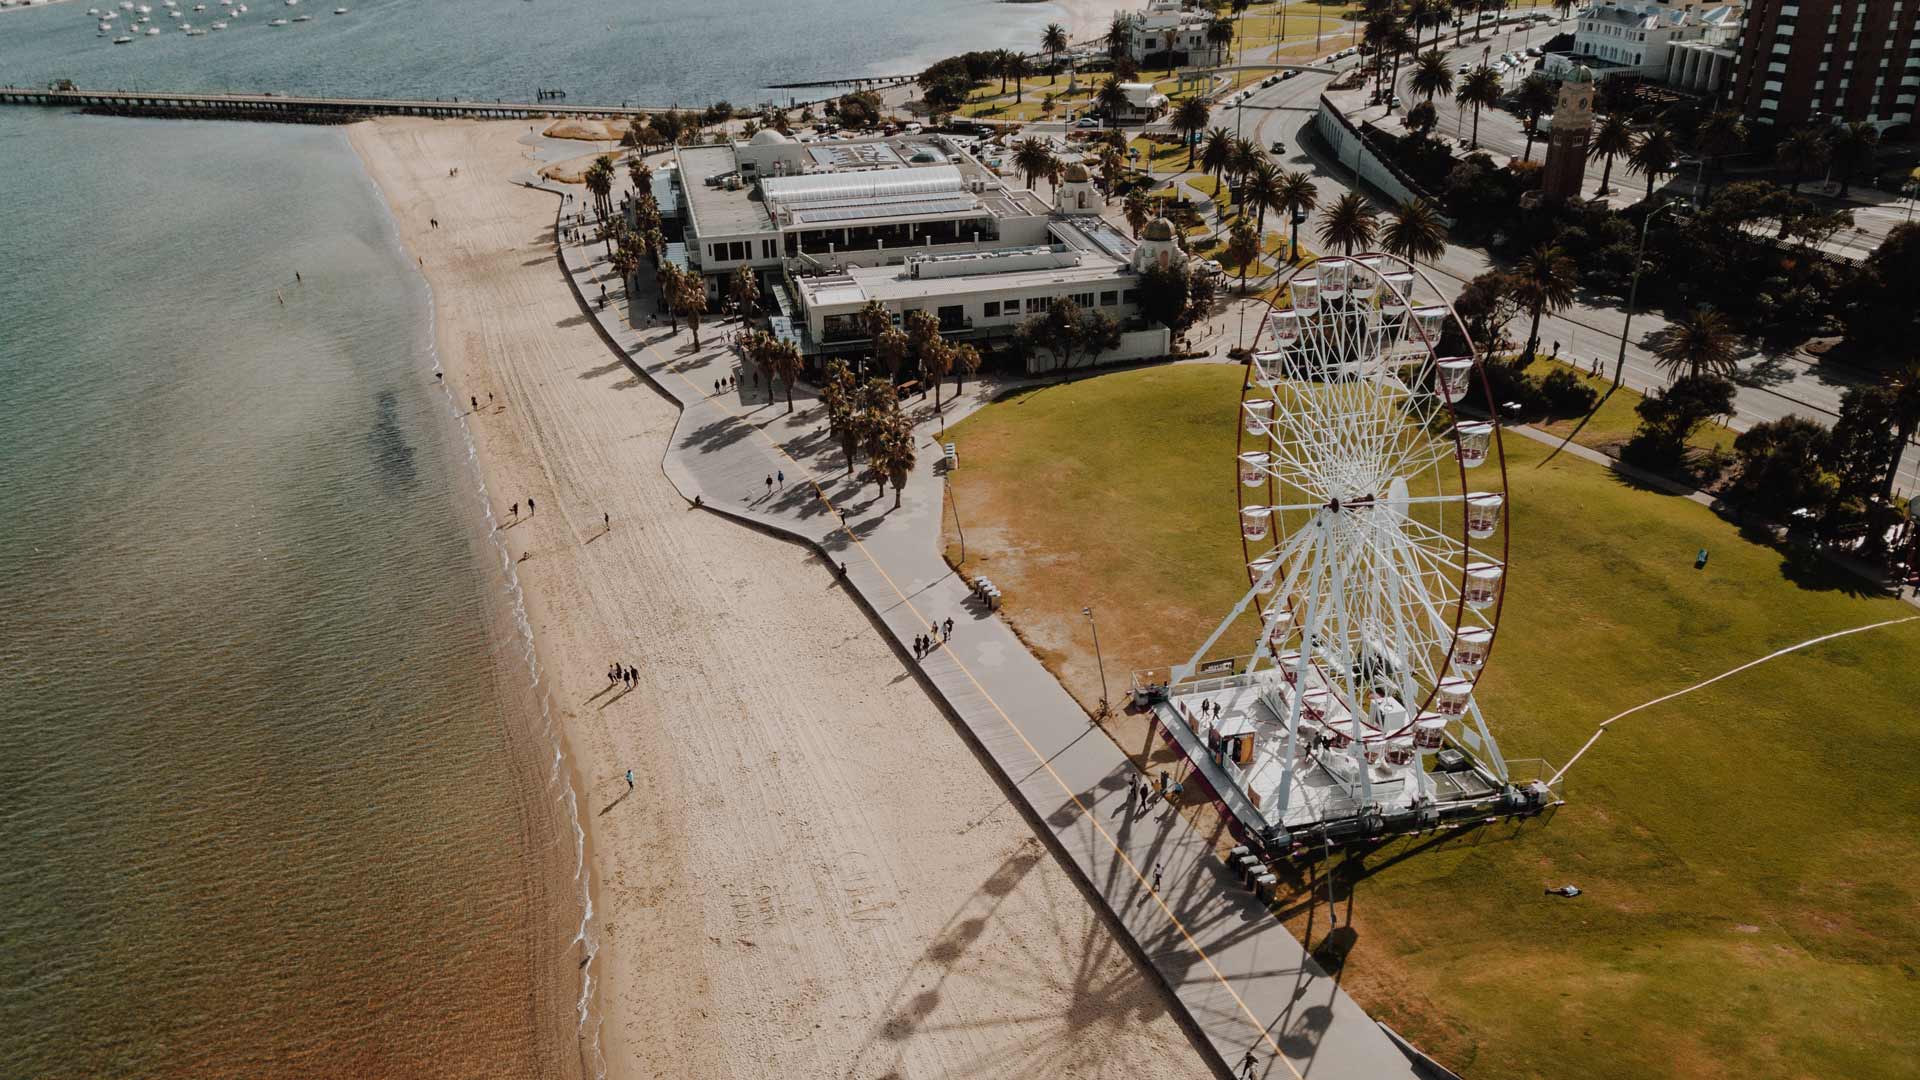 April Sun Is the New Two-Week Music Festival Hitting the St Kilda Foreshore This Autumn